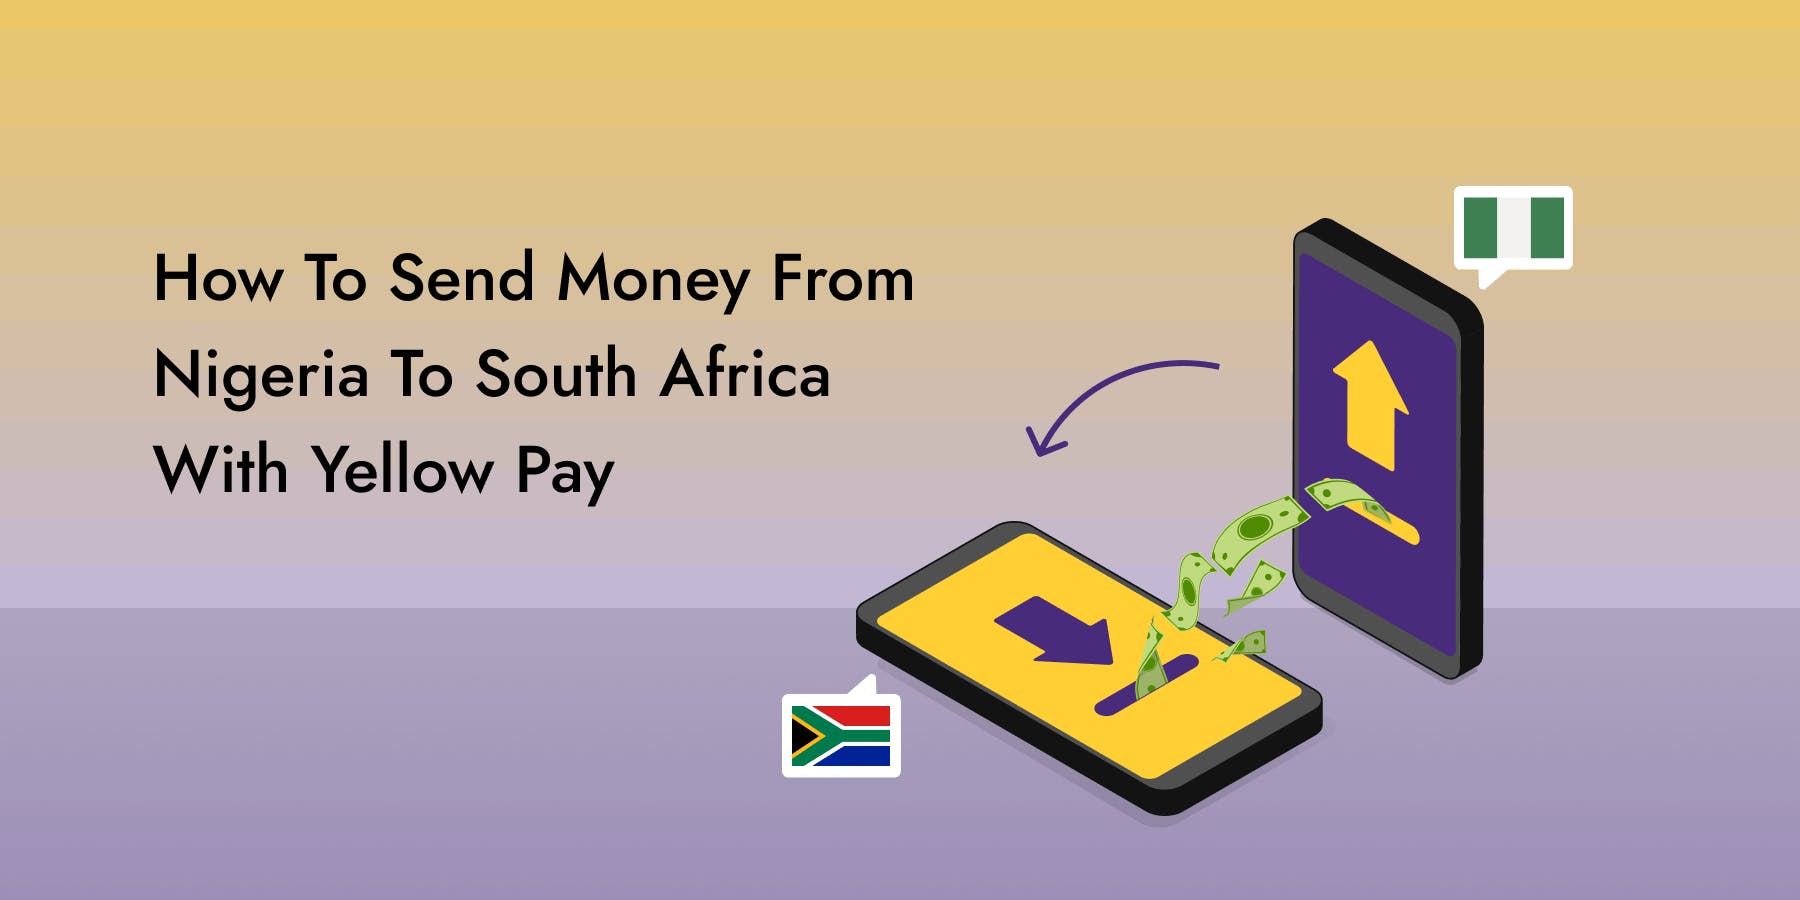 How to send money from nigeria to south africa